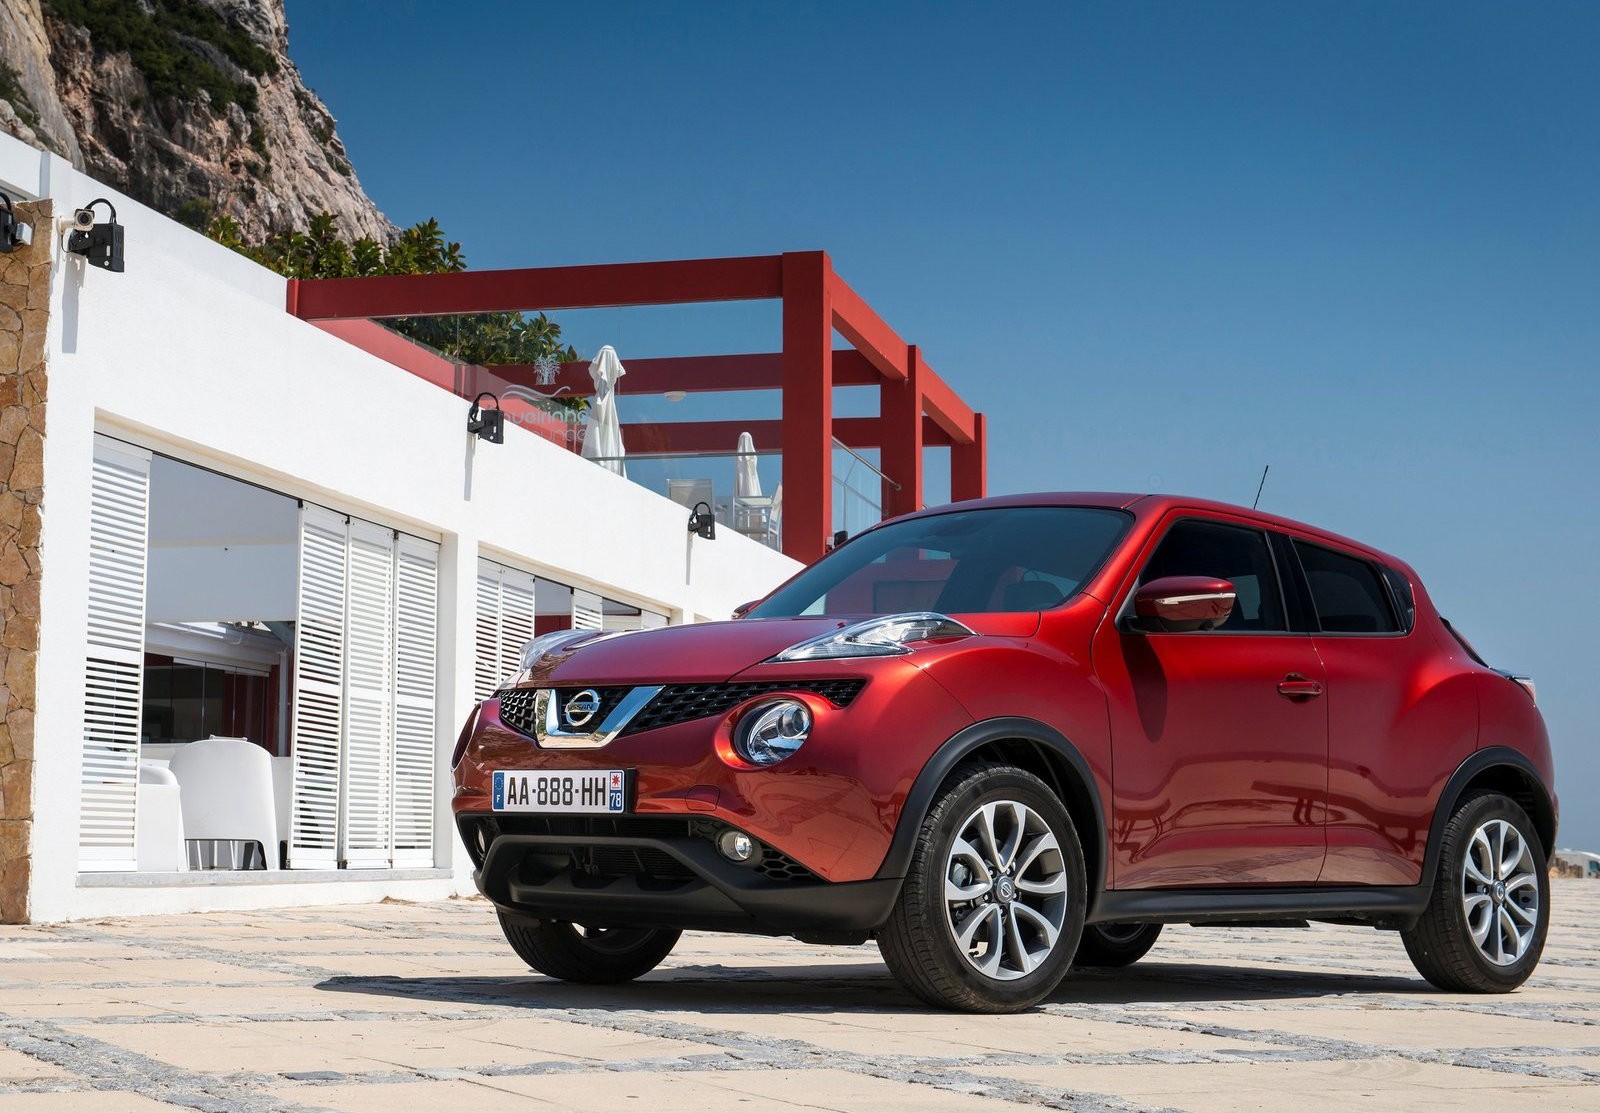 2017 Nissan Juke Priced in the U.S. from $20,250 - autoevolution